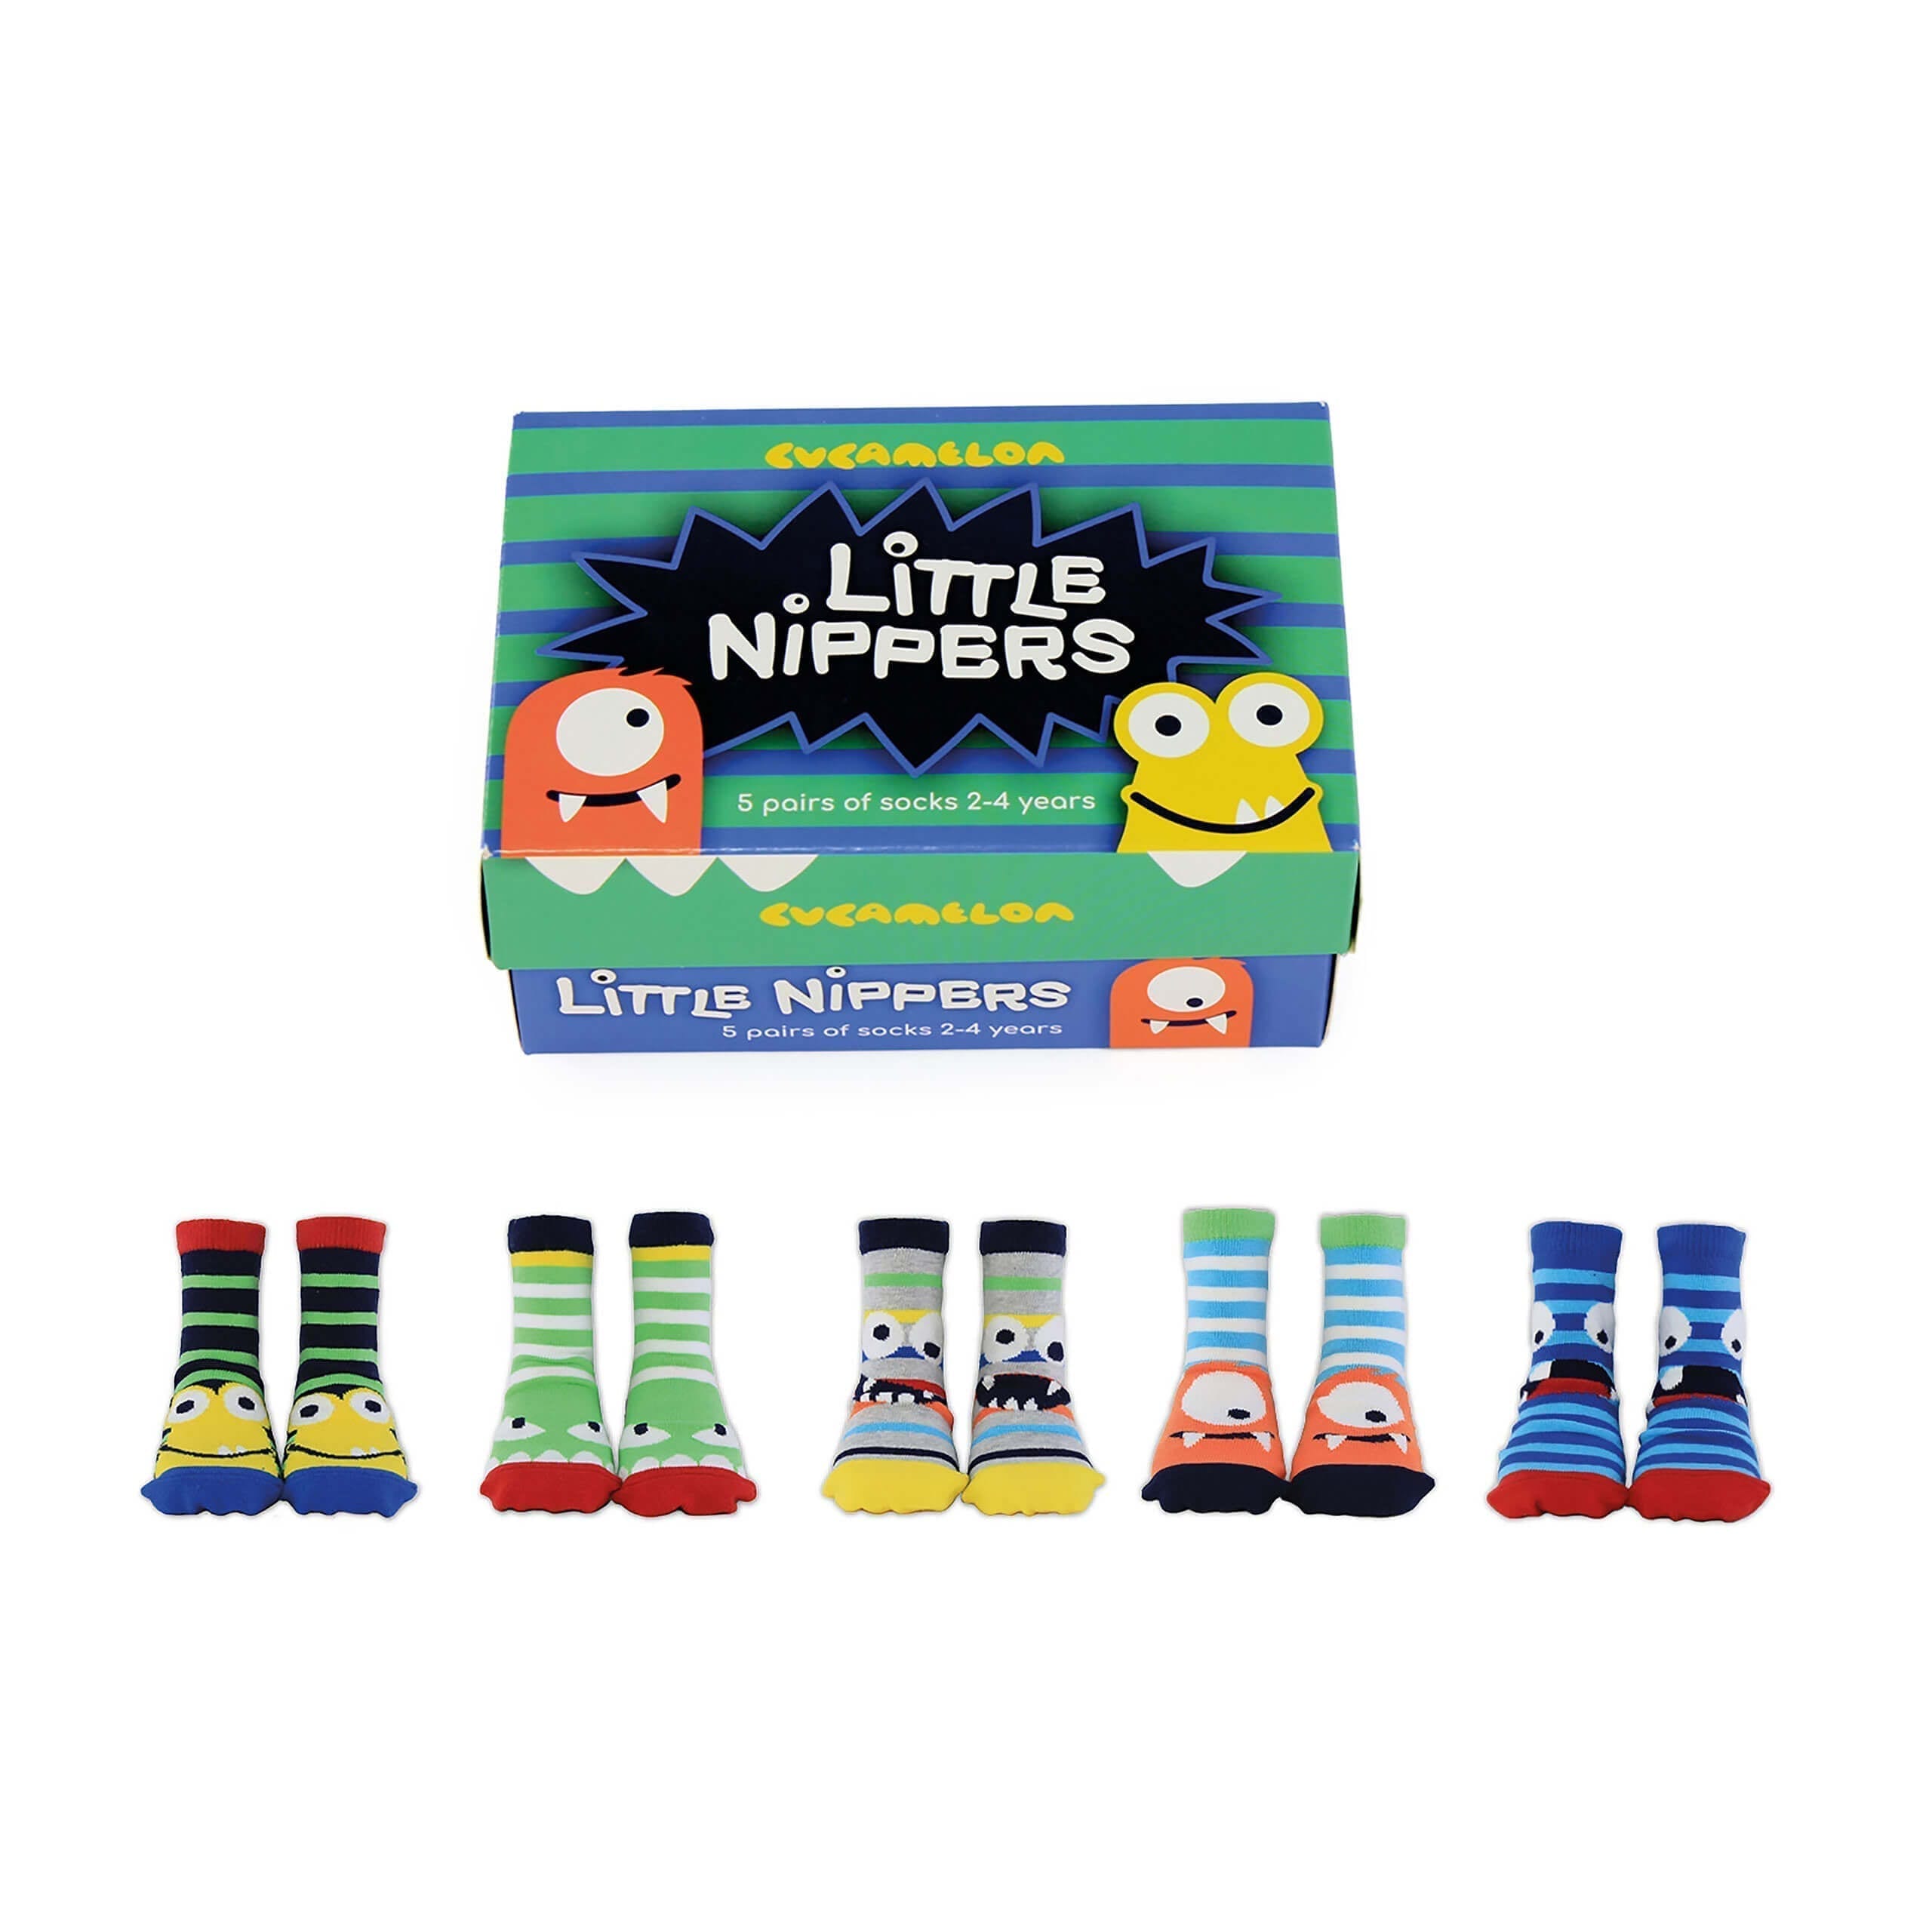 Little Nippers Sock Set By United Oddsocks